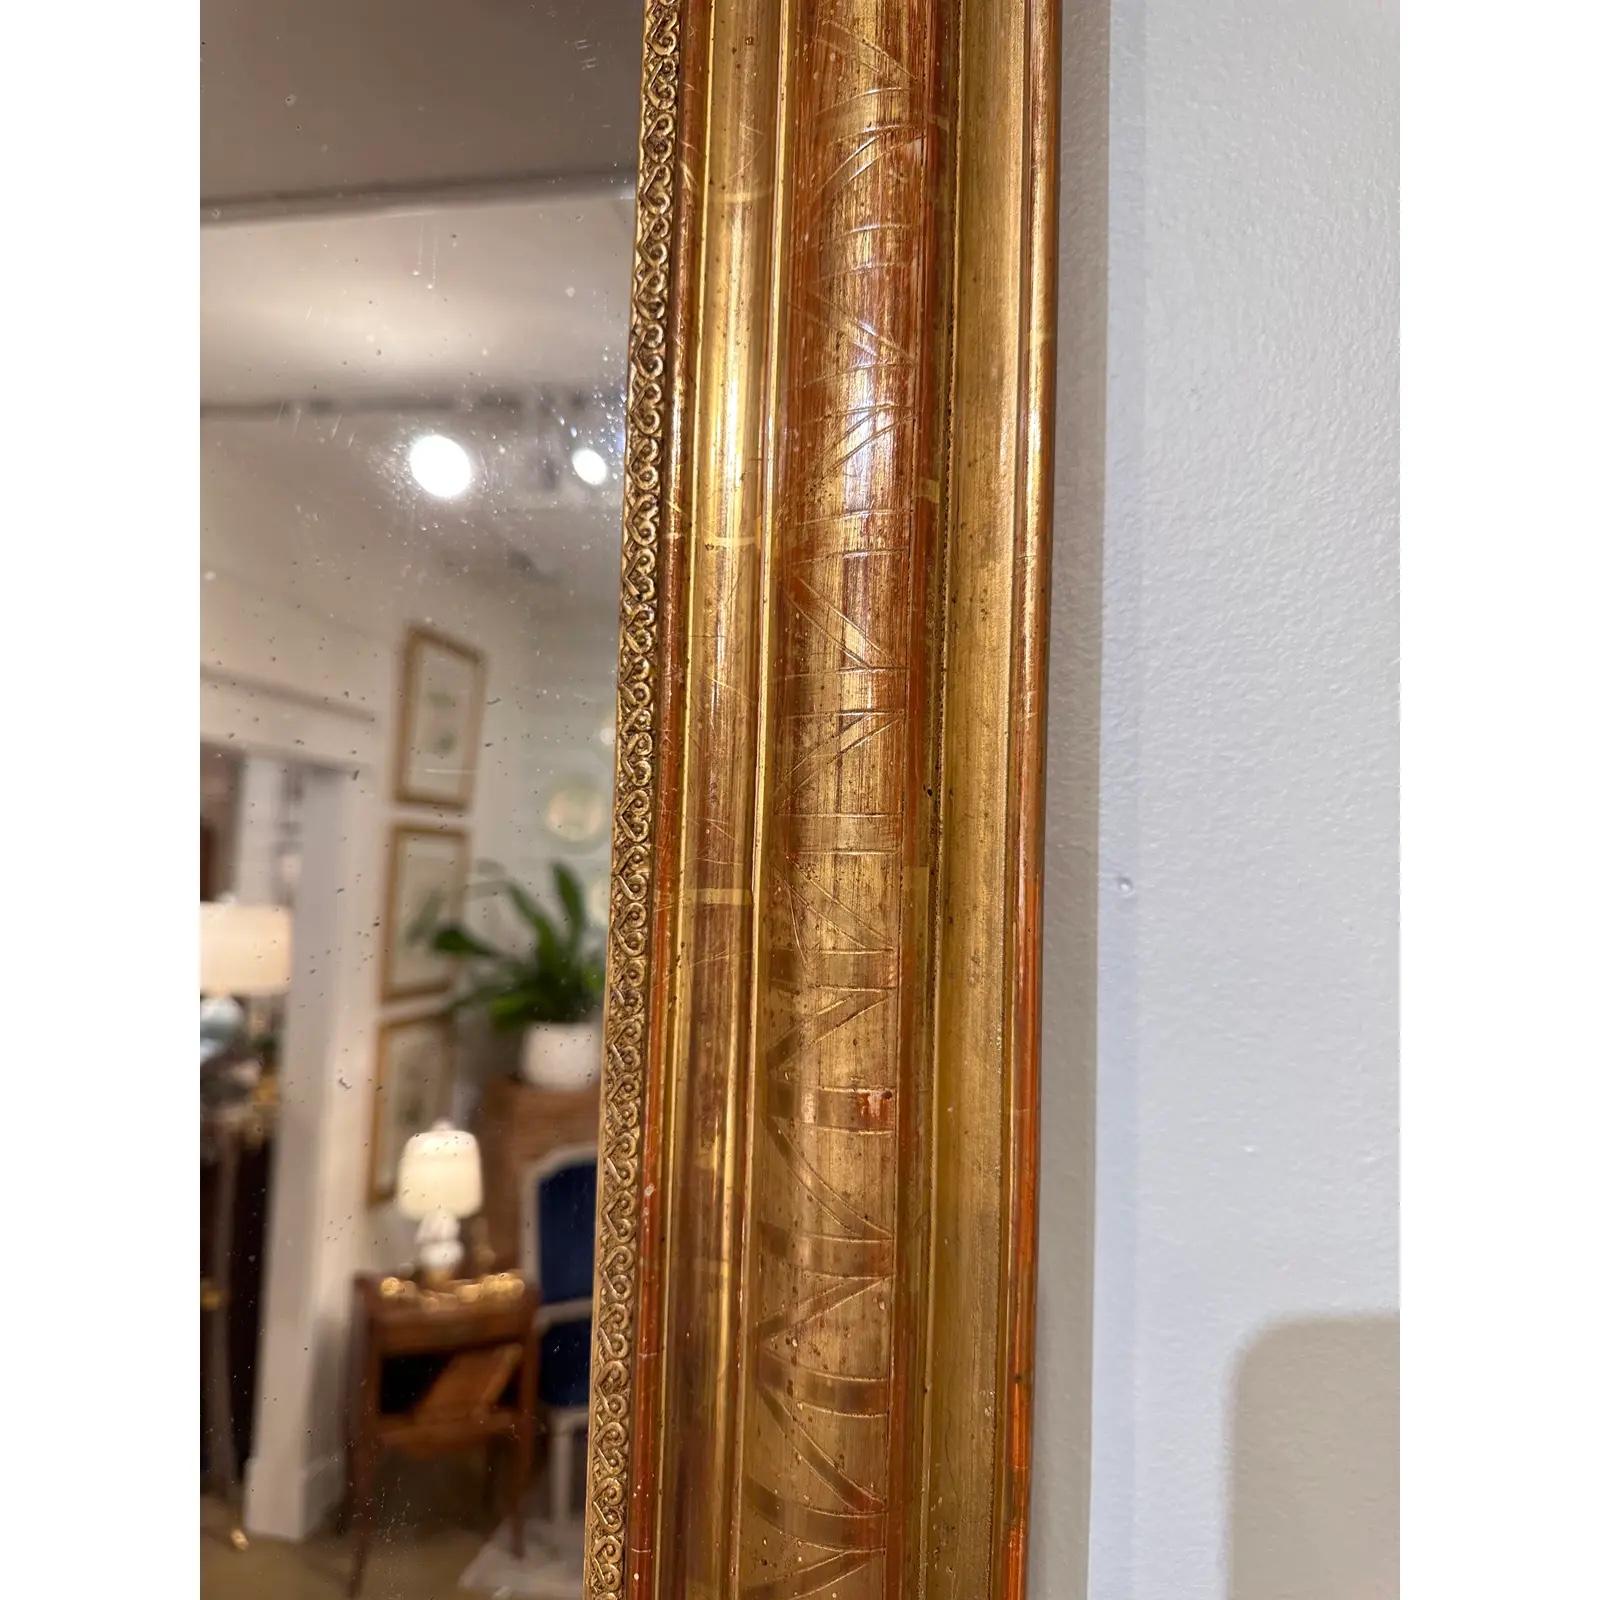 This is a beautiful Louis Philippe mirror! This mirror holds to a simple quiet design without a lot of busyness going on. However, there is delicate engraving on the edges that adds just a touch of ornamentation. This mirror is unique in that it I.